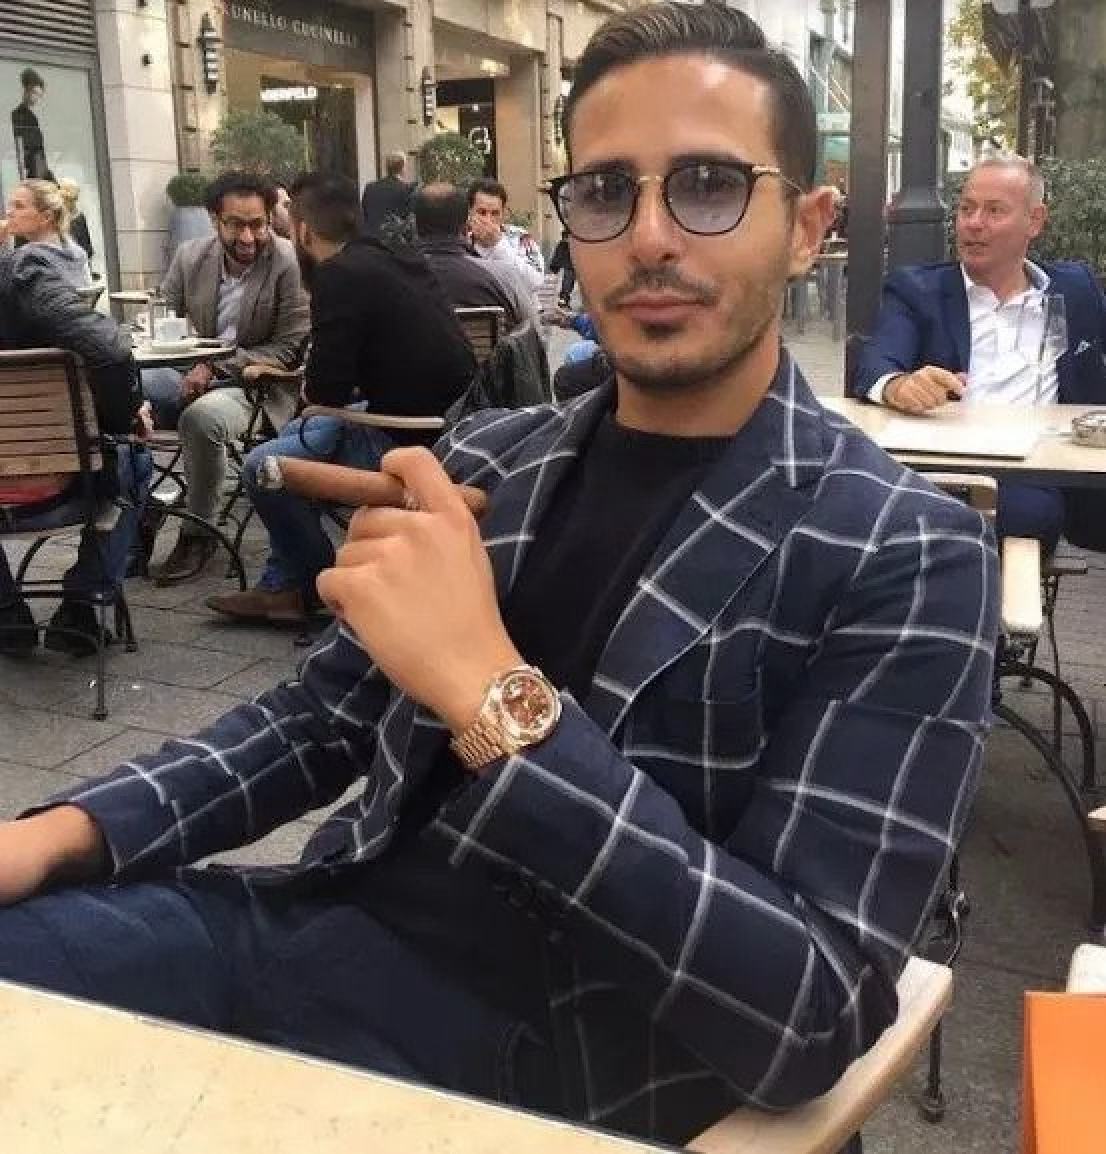 Simon Leviev posed as a billionaire’s son to attract women on Tinder, who he then scammed out of thousands of dollars. Photo: @simon_leviev_official/Instagram